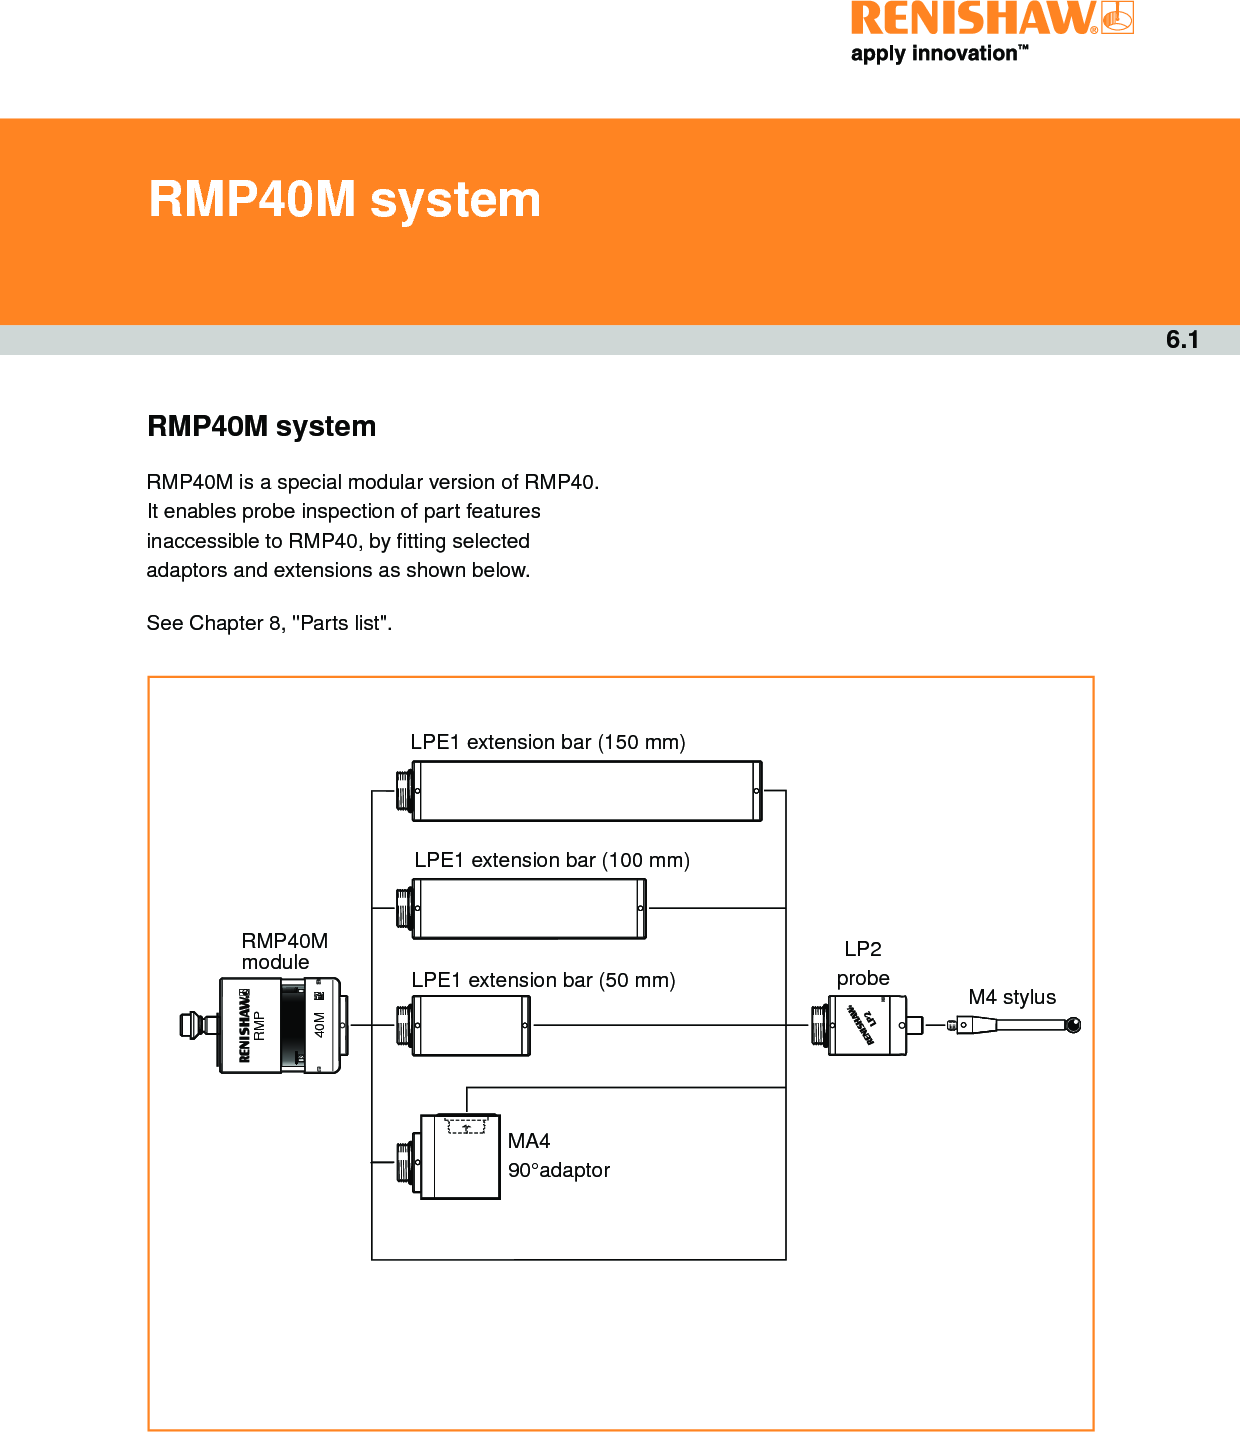 40MRMP437986.1RMP40M systemRMP40M is a special modular version of RMP40. It enables probe inspection of part features inaccessible to RMP40, by fitting selected adaptors and extensions as shown below.See Chapter 8, &quot;Parts list&quot;.M4 stylusLP2 probeLPE1 extension bar (150 mm)LPE1 extension bar (100 mm)LPE1 extension bar (50 mm)MA4 90°adaptorRMP40M moduleRMP40M system